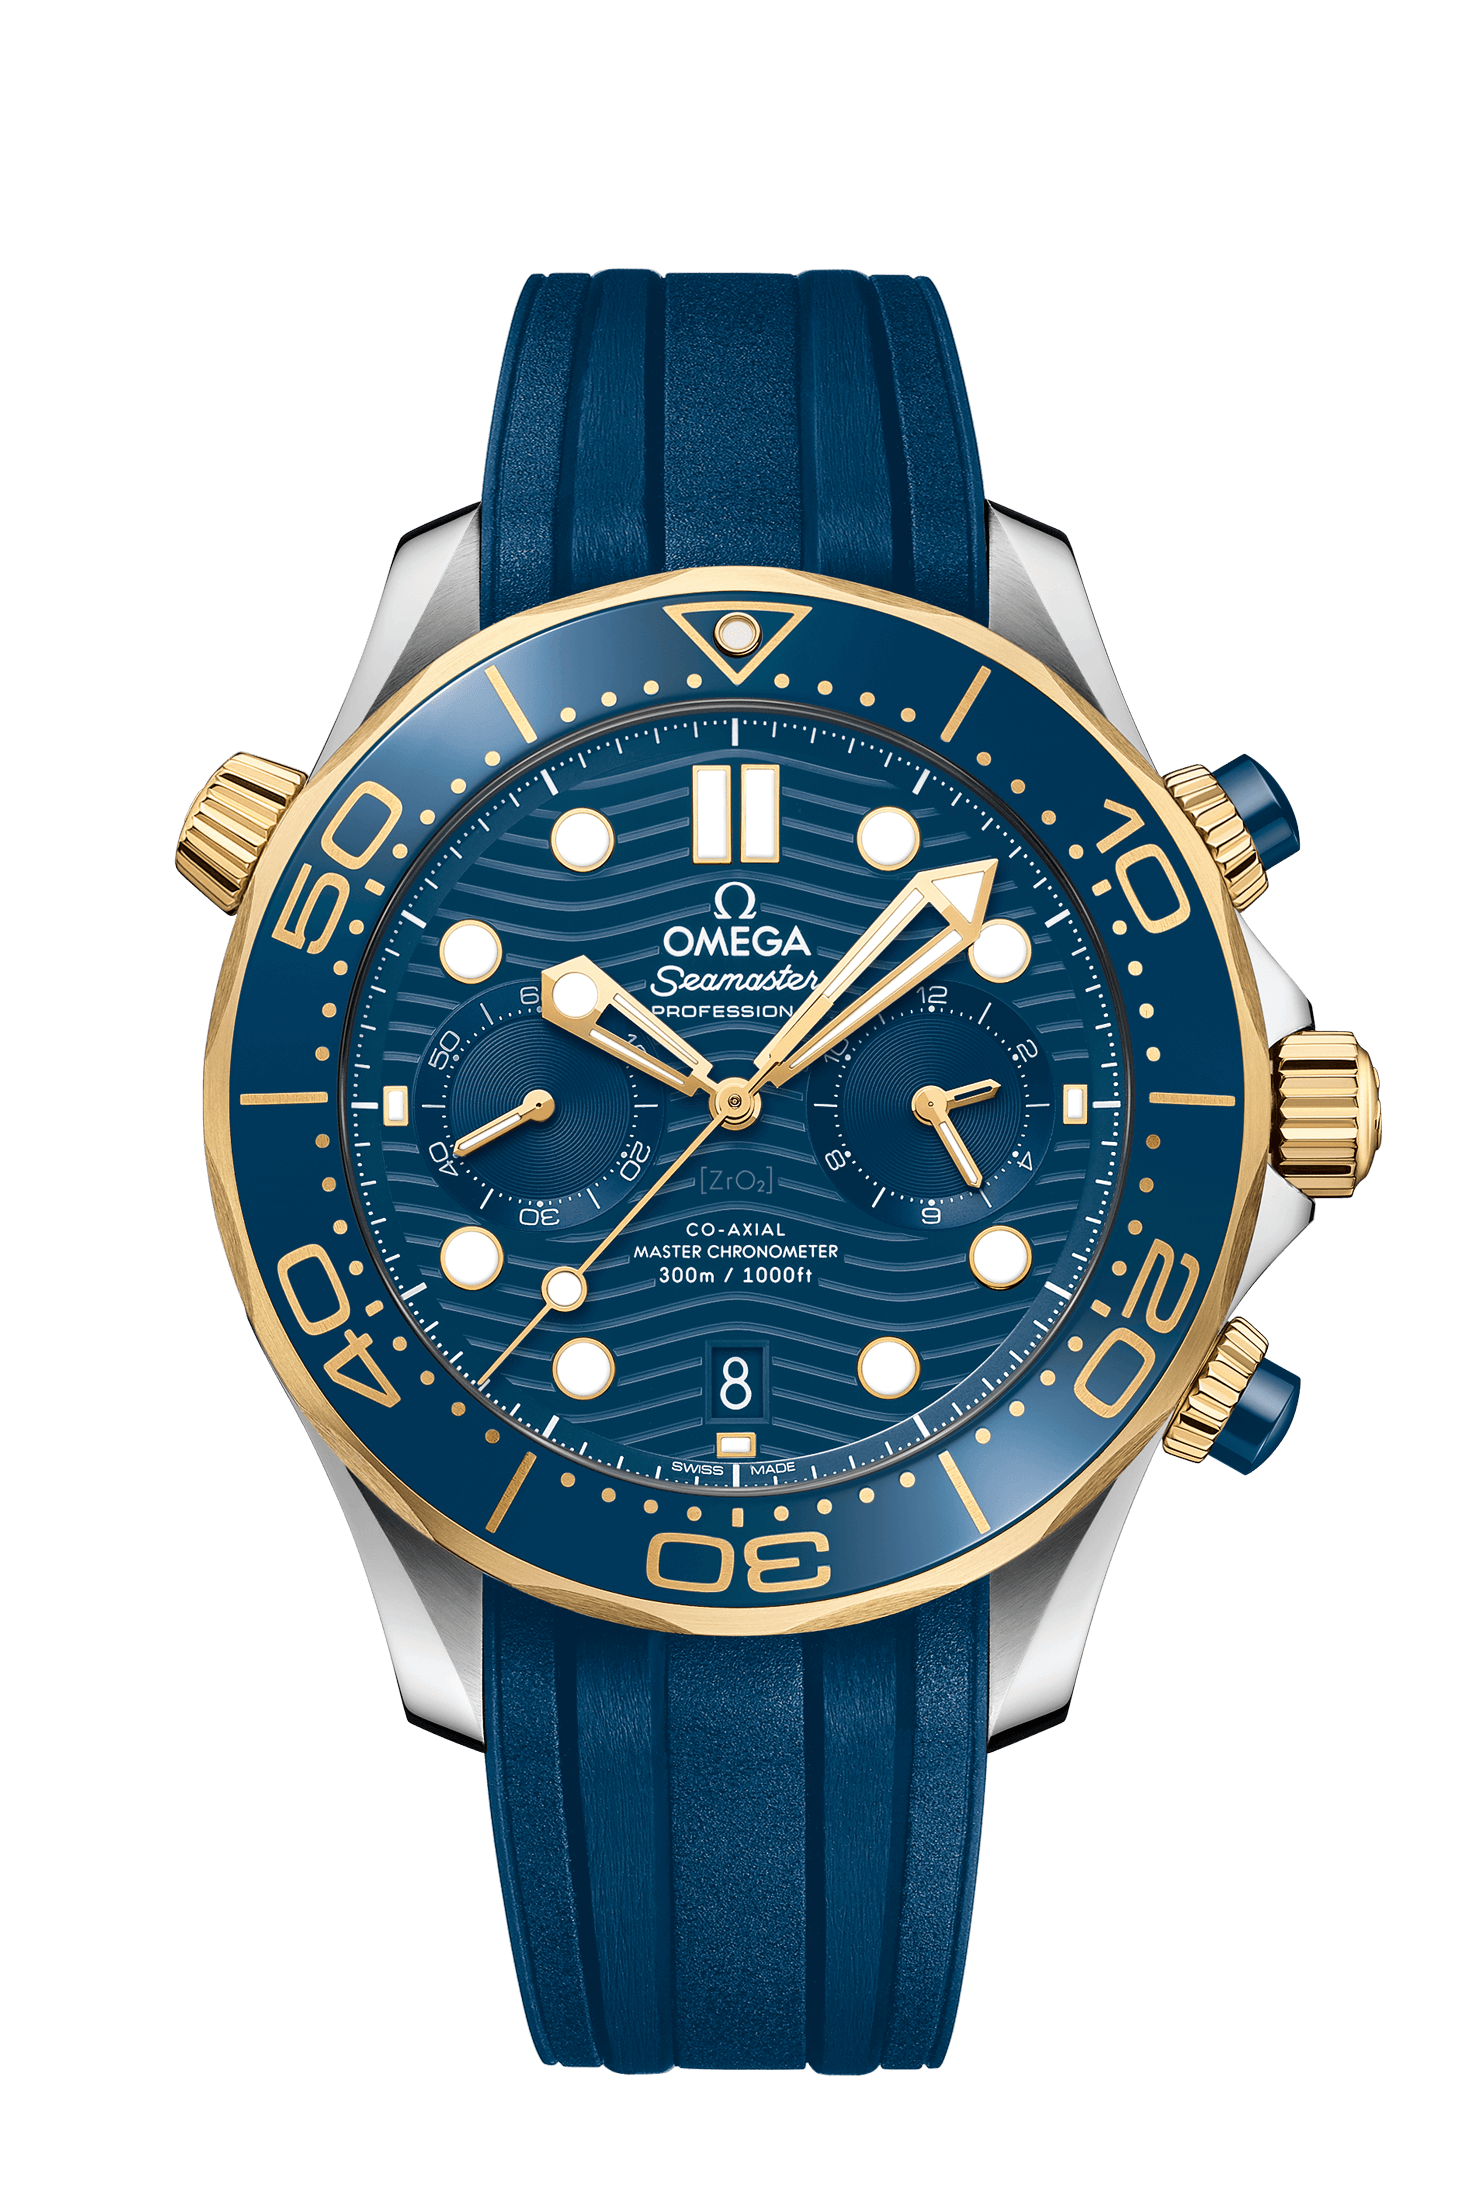 Men's watch / unisex  OMEGA, Diver 300m Co Axial Master Chronometer Chronograph / 44mm, SKU: 210.22.44.51.03.001 | watchphilosophy.co.uk